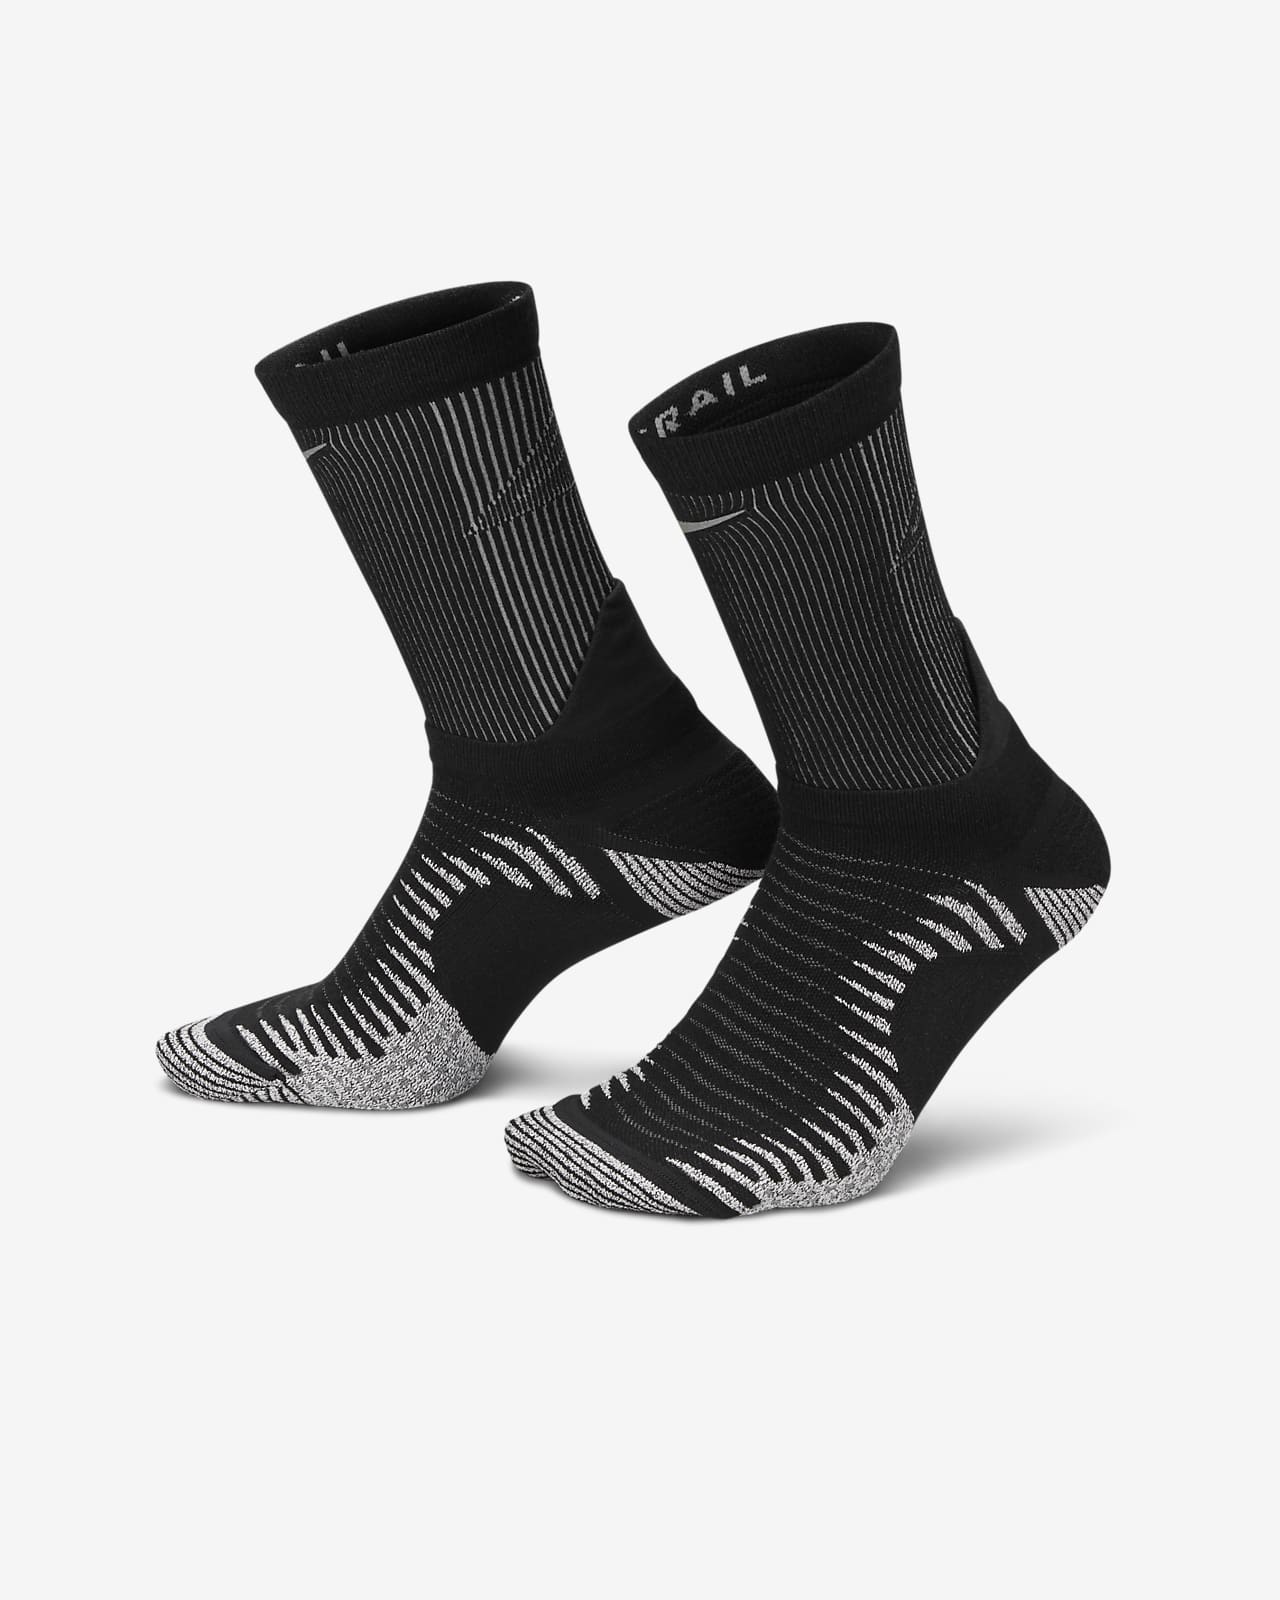 Calcetines para trail running, Calcetines para trail